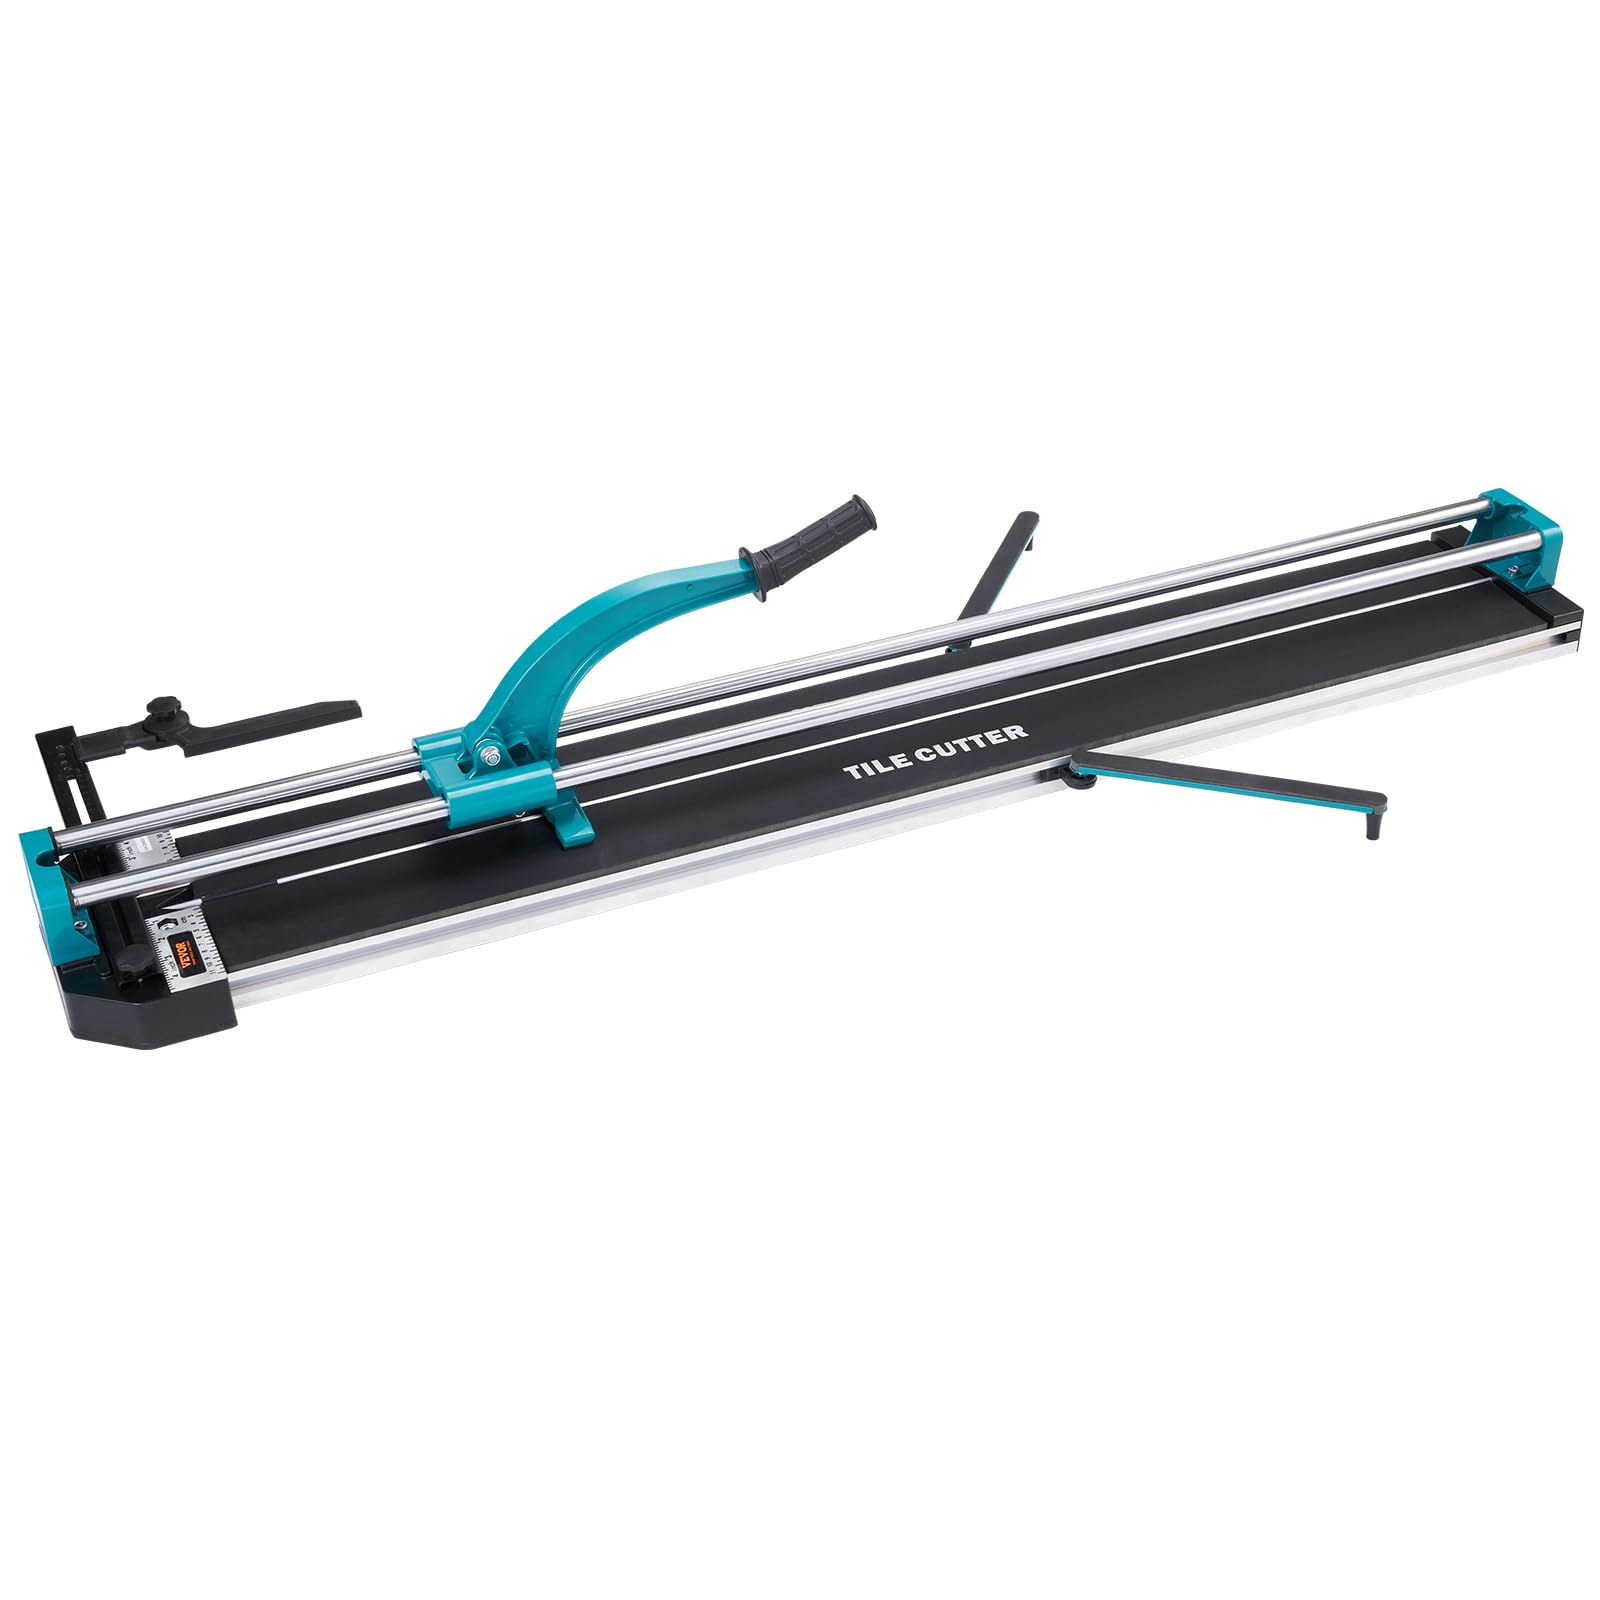 VEVOR Manual Tile Cutter, 48 inch, Porcelain Ceramic Tile Cutter with Tungsten Carbide Cutting Wheel, Infrared Positioning, Anti-Skid Feet, Double Rails for professional installers or beginners